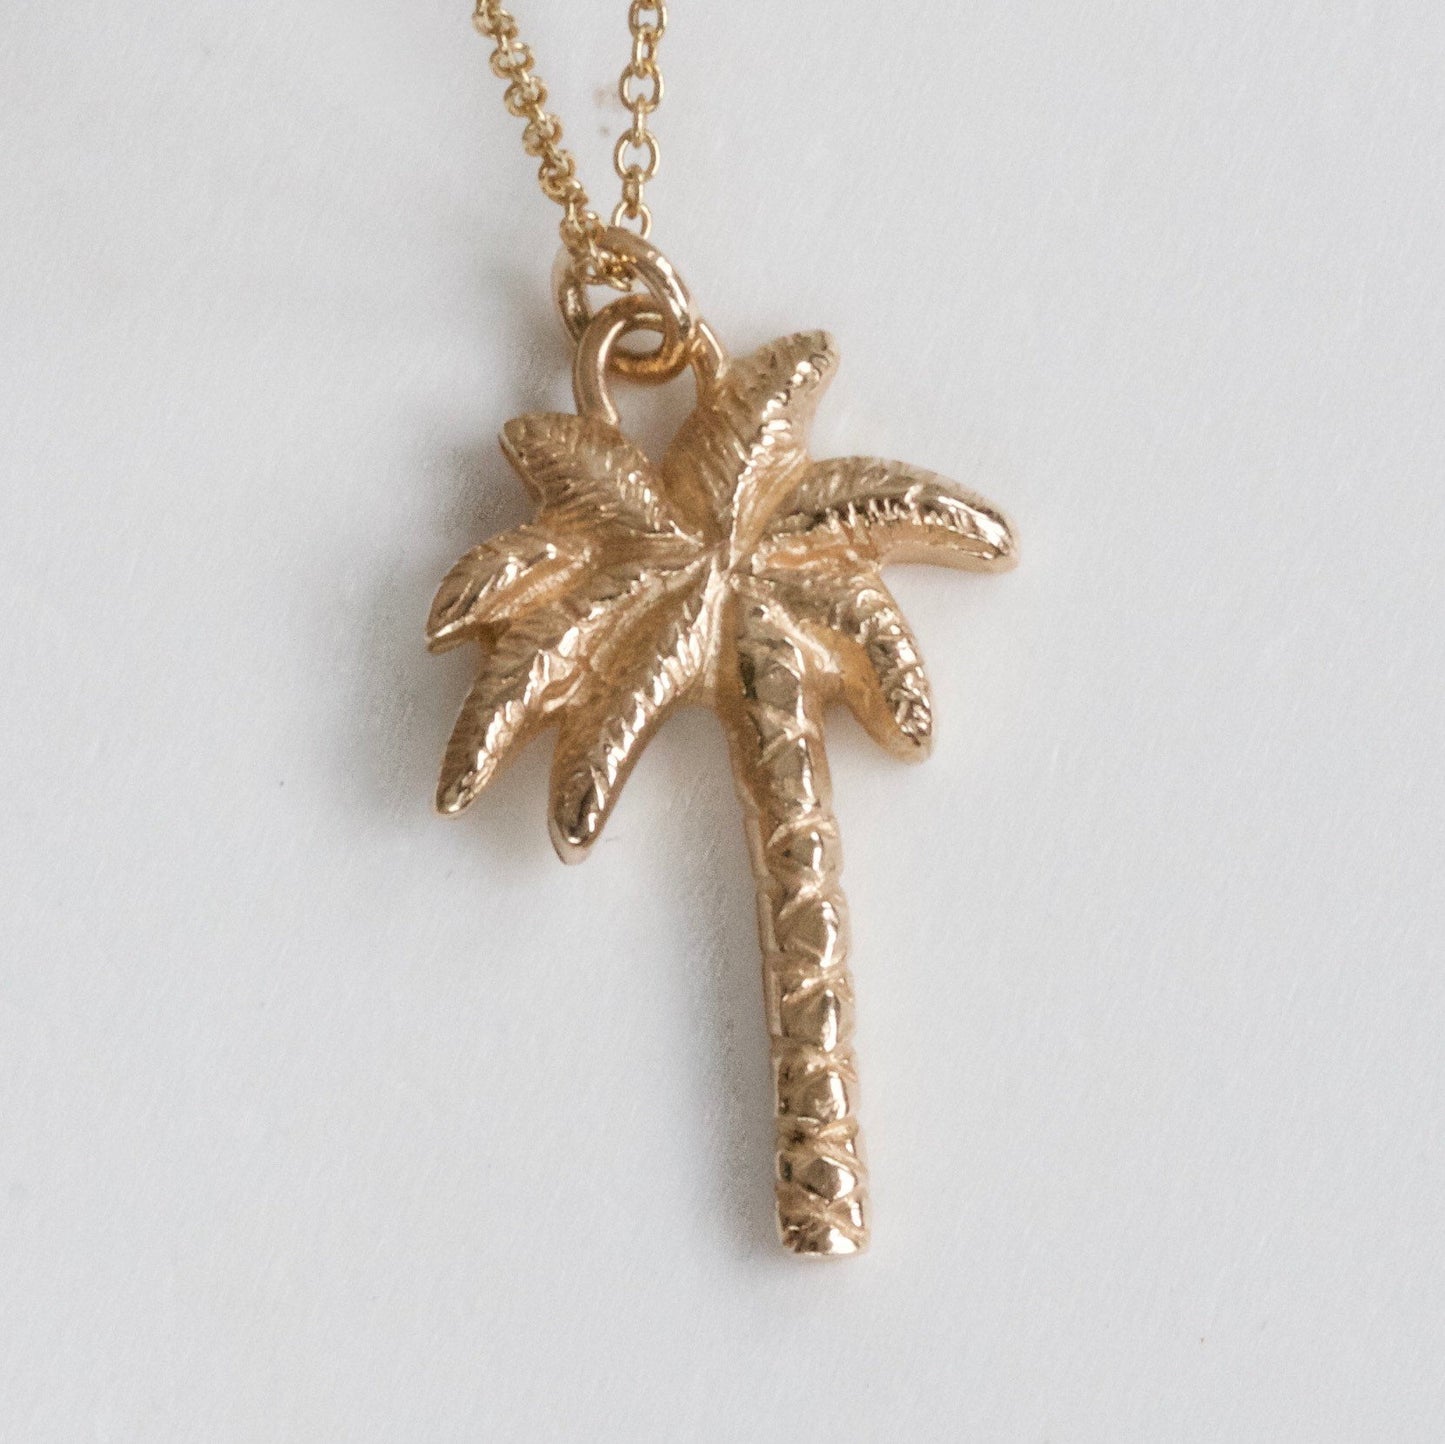 Solid 9ct Gold Palm Tree Necklace, Gold Palm Tree Pendant on a chain